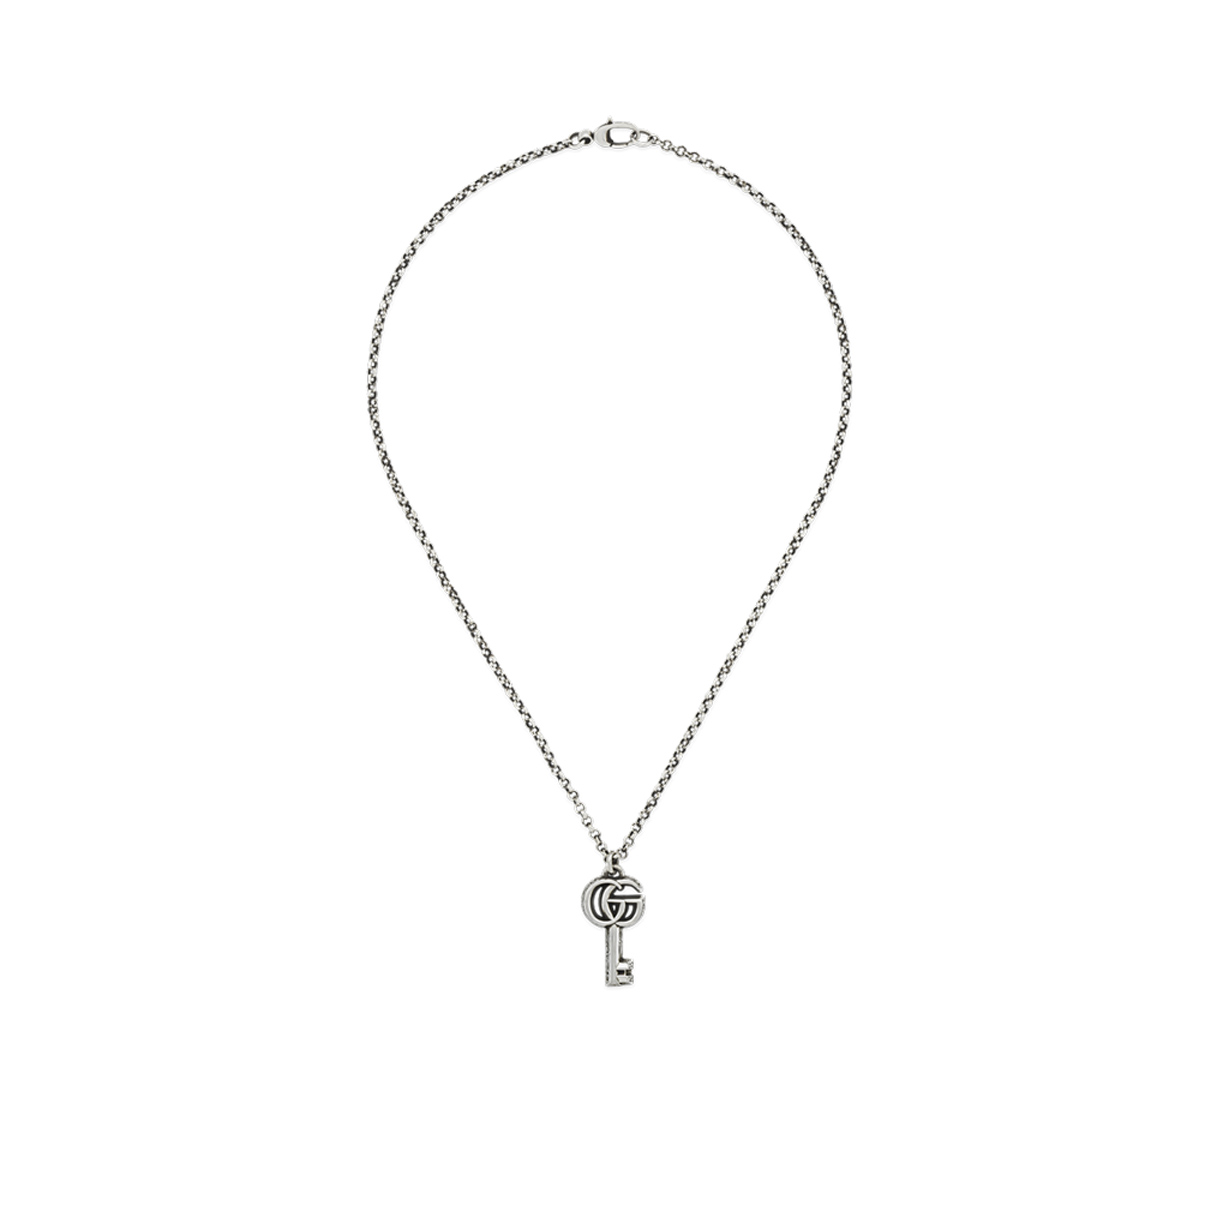 Gucci GG Marmont Necklace in Sterling Silver